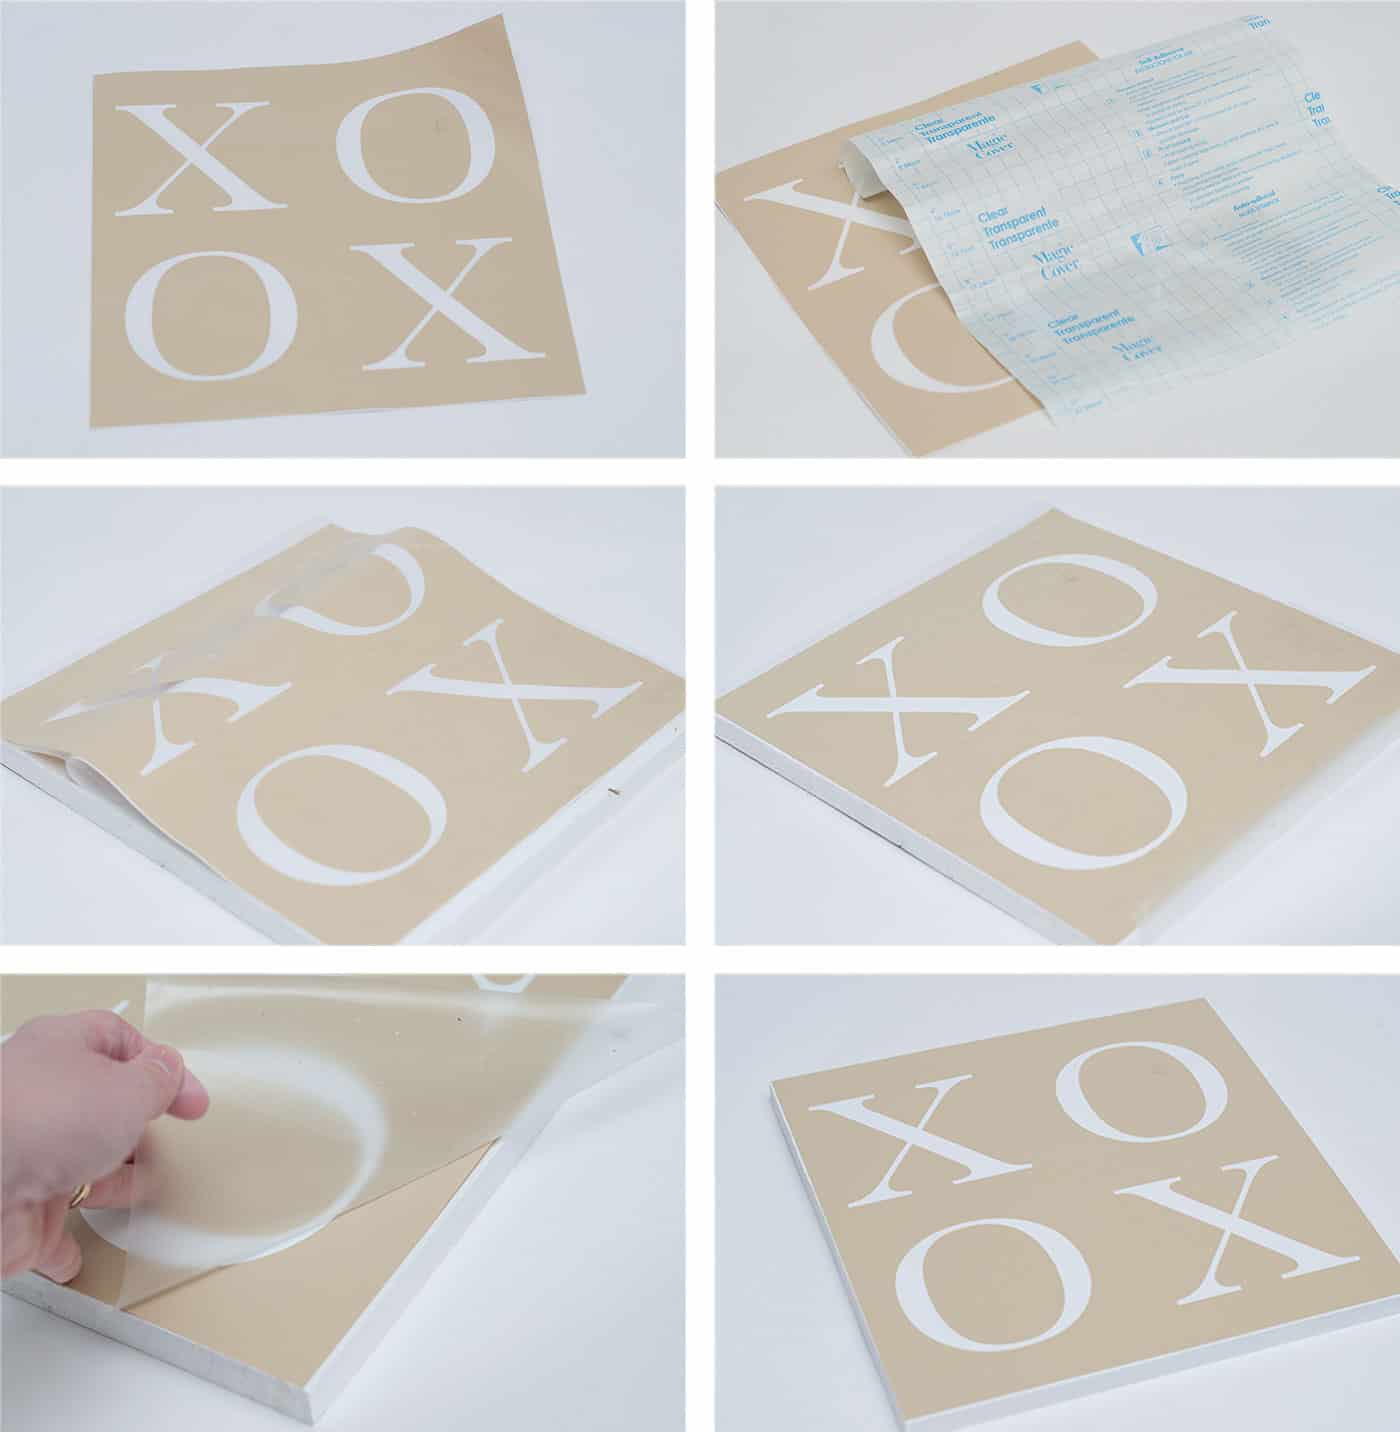 Adding an adhesive vinyl stencil to the square piece of wood using transfer paper